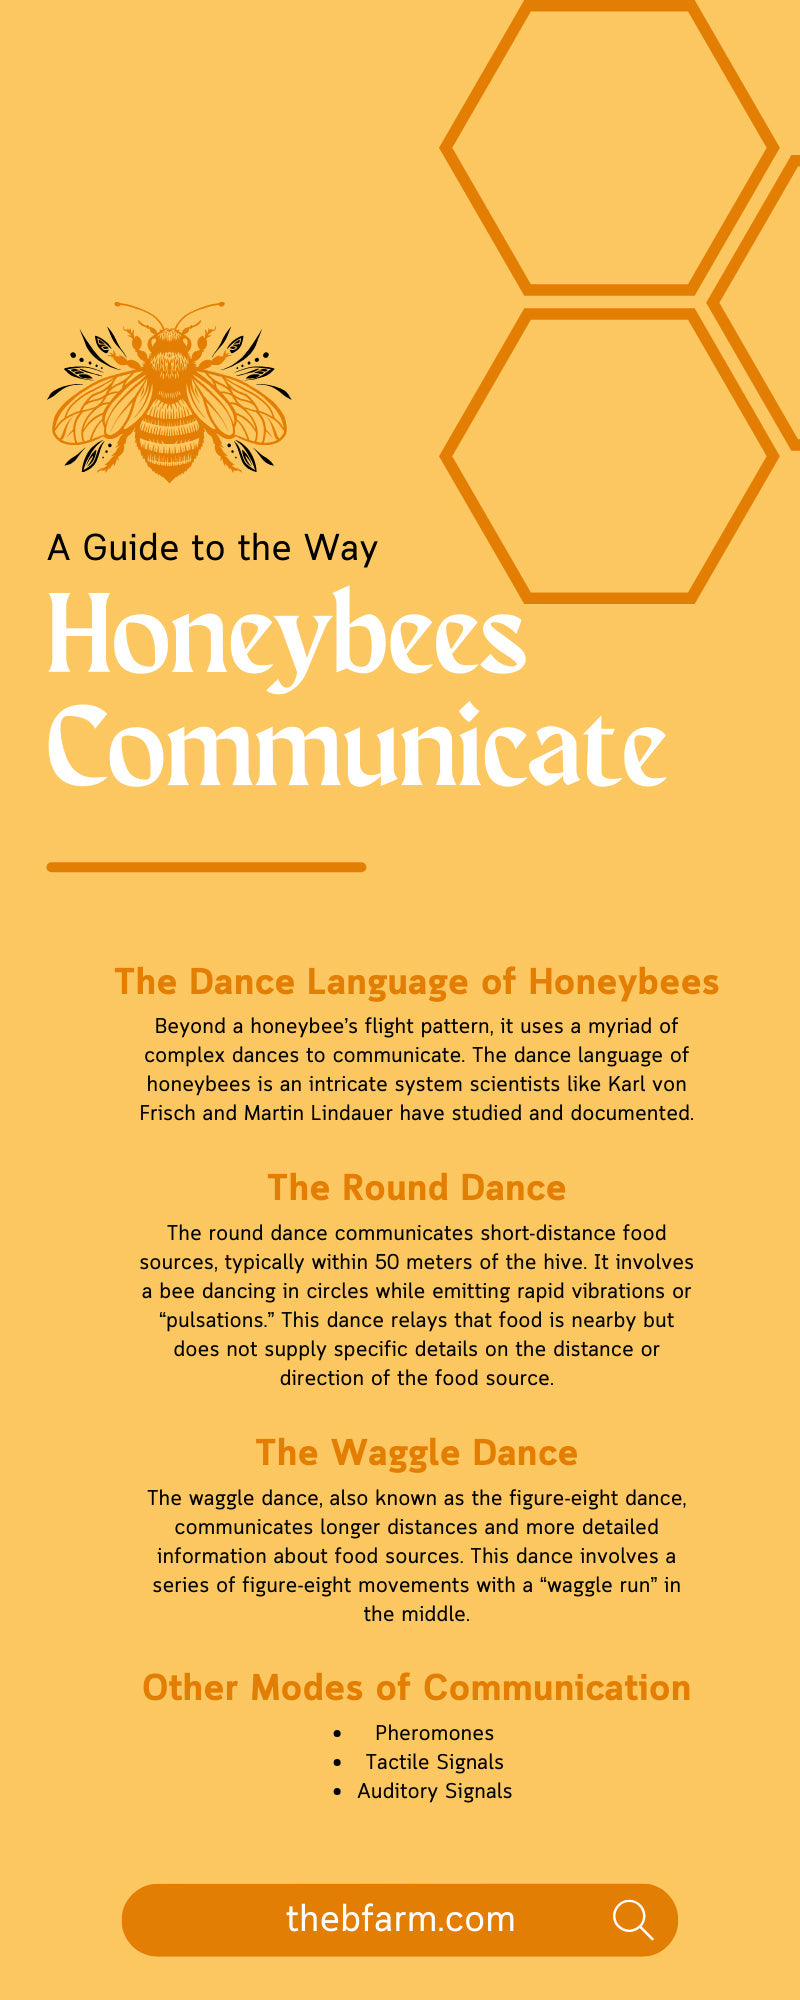 A Guide to the Way Honeybees Communicate